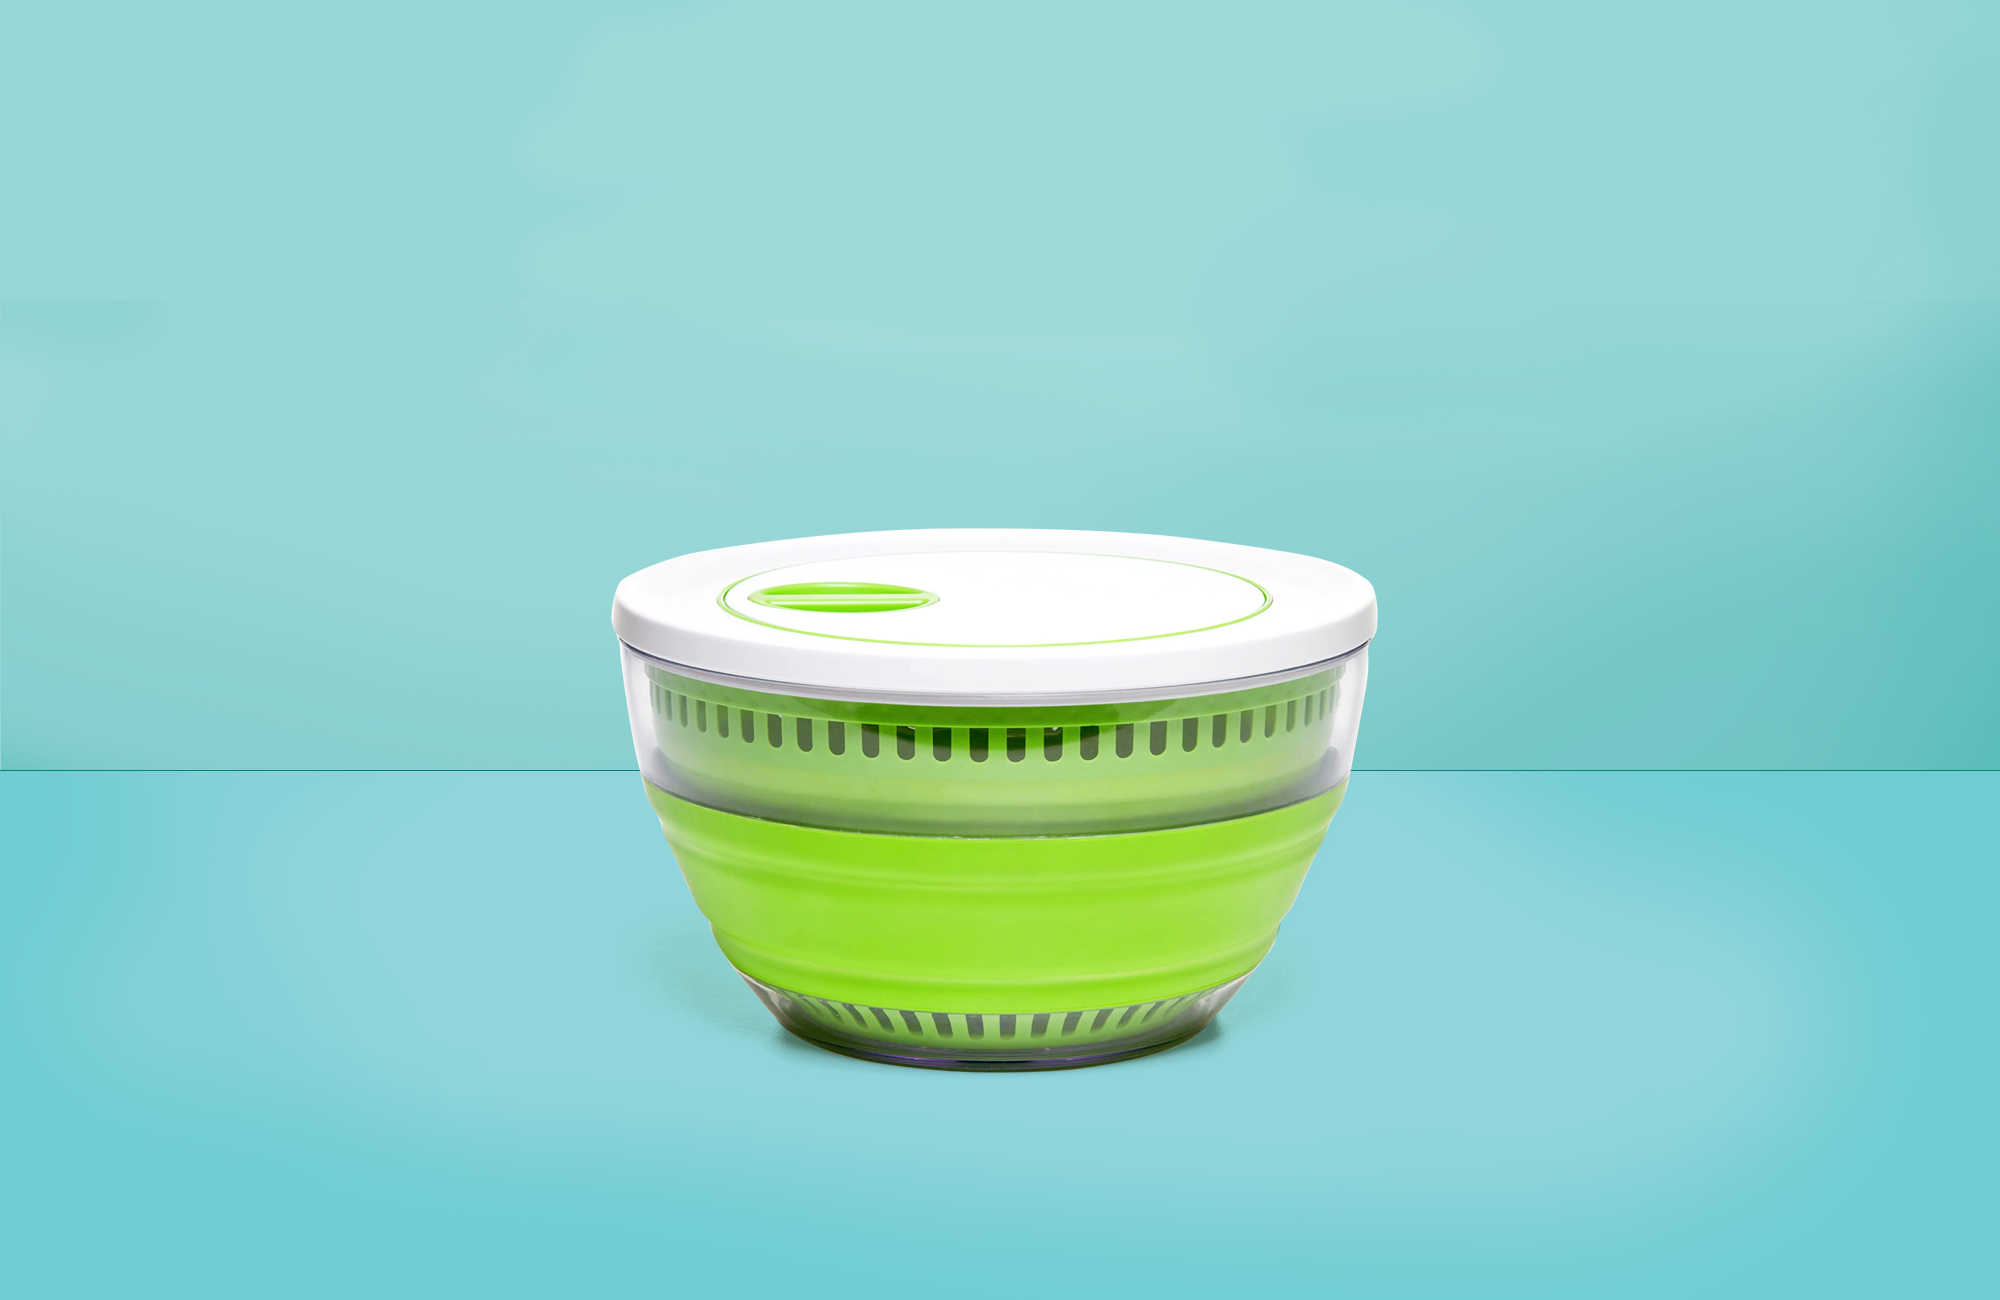 Salad spinner Large Salad Spinner Vegetable Or Lettuce Dryer,Keeper,Crisper and Shaker,Compact Rotary Handle Is Easy to Spin and Allows Easy Storage 